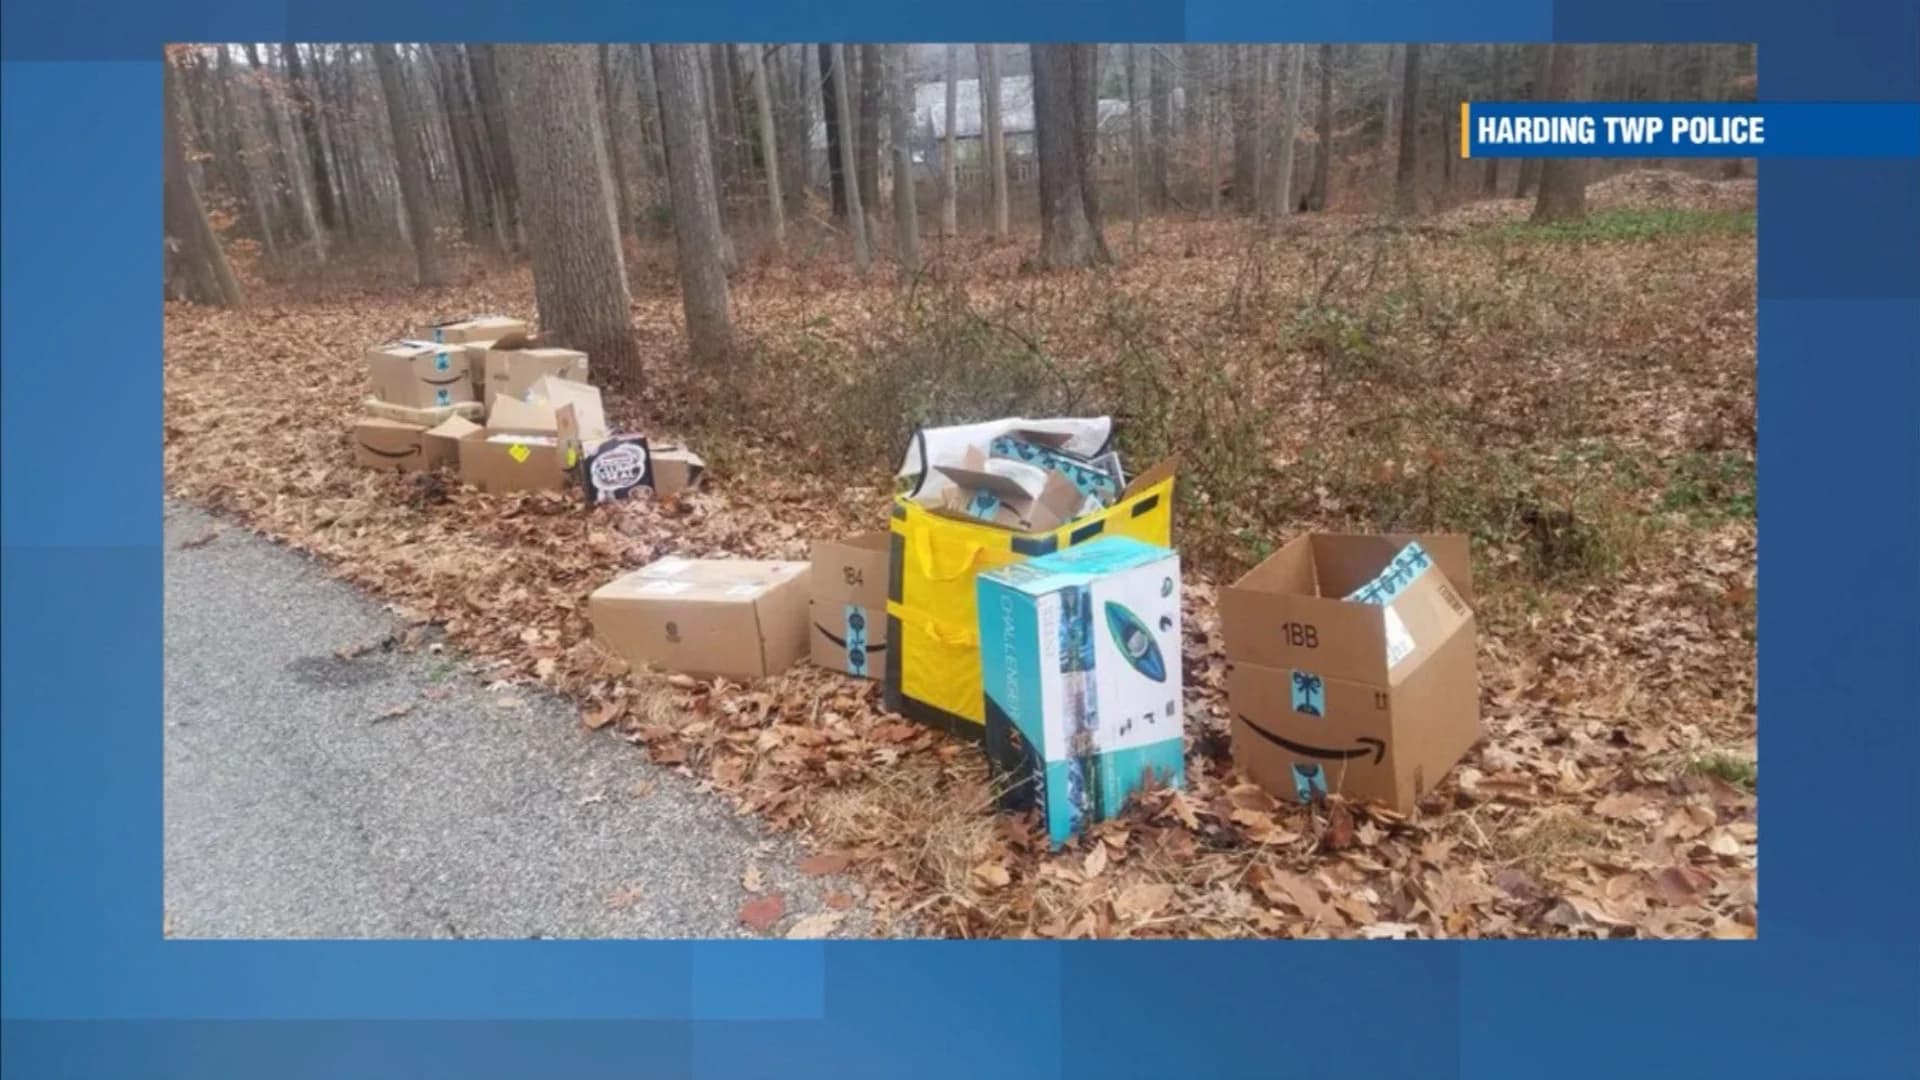 Missing a package? Dozens of Amazon boxes found on side of road